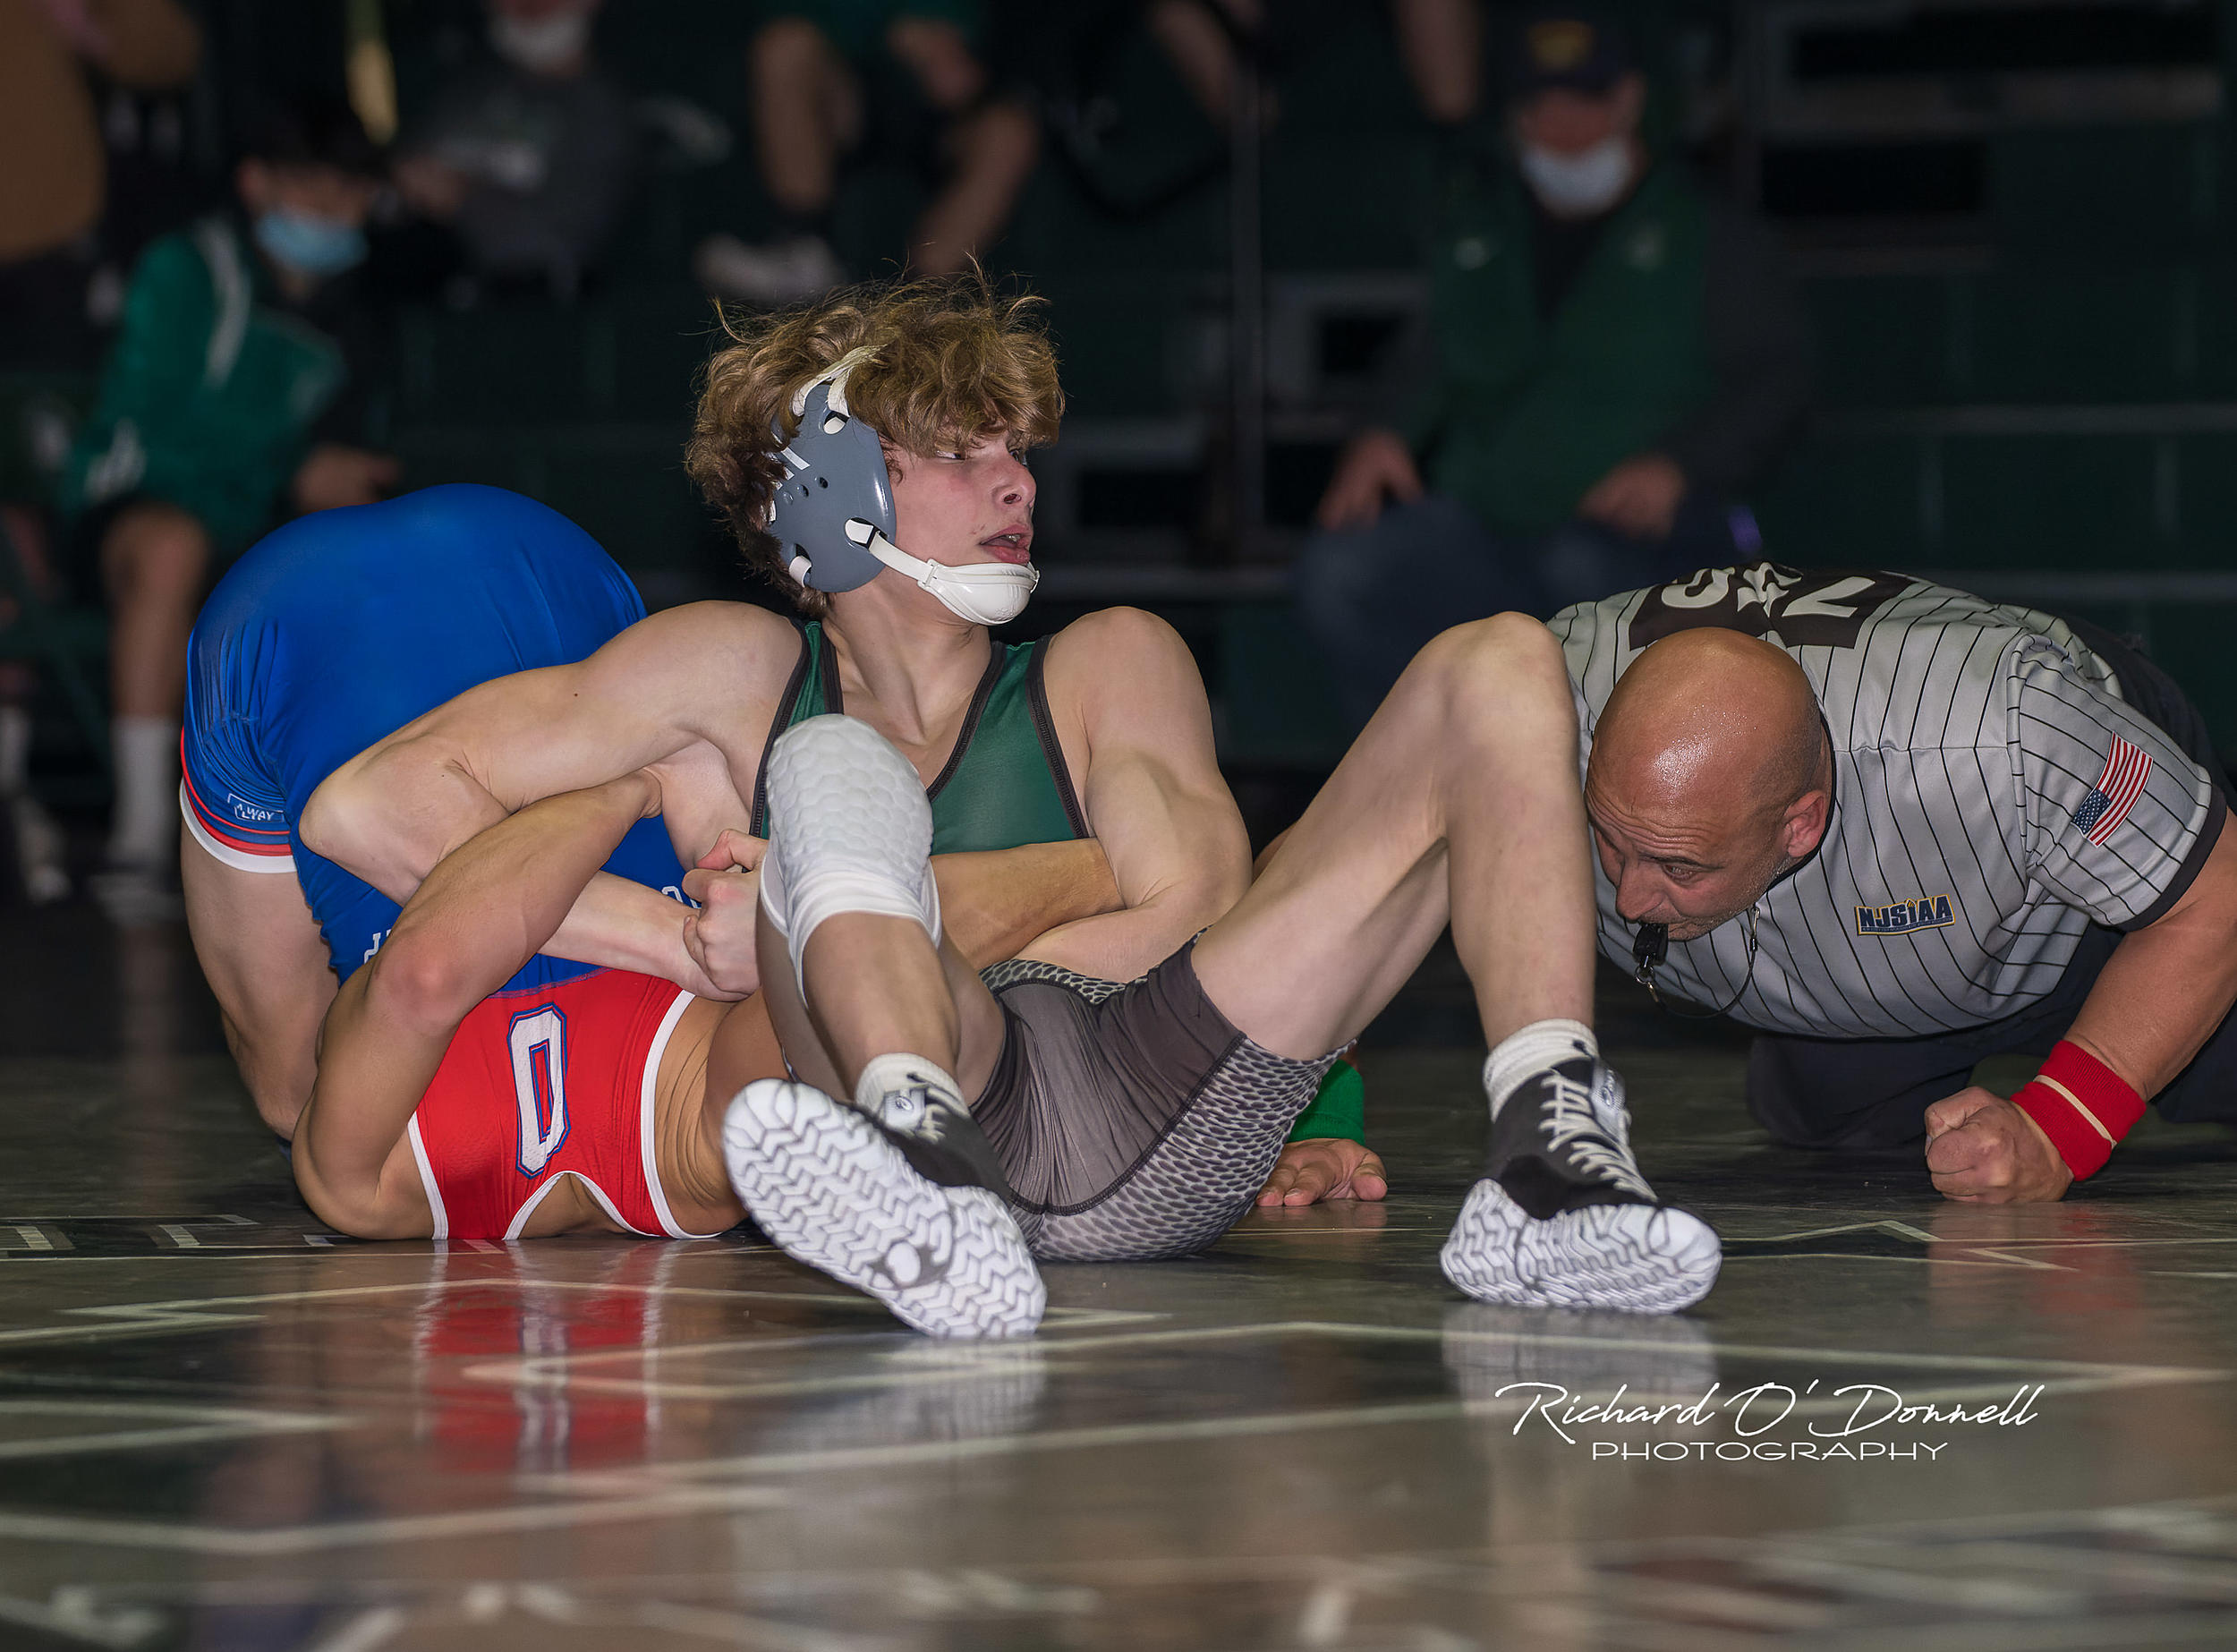 Who leads N.J. wrestling in pins and other bonus-point wins